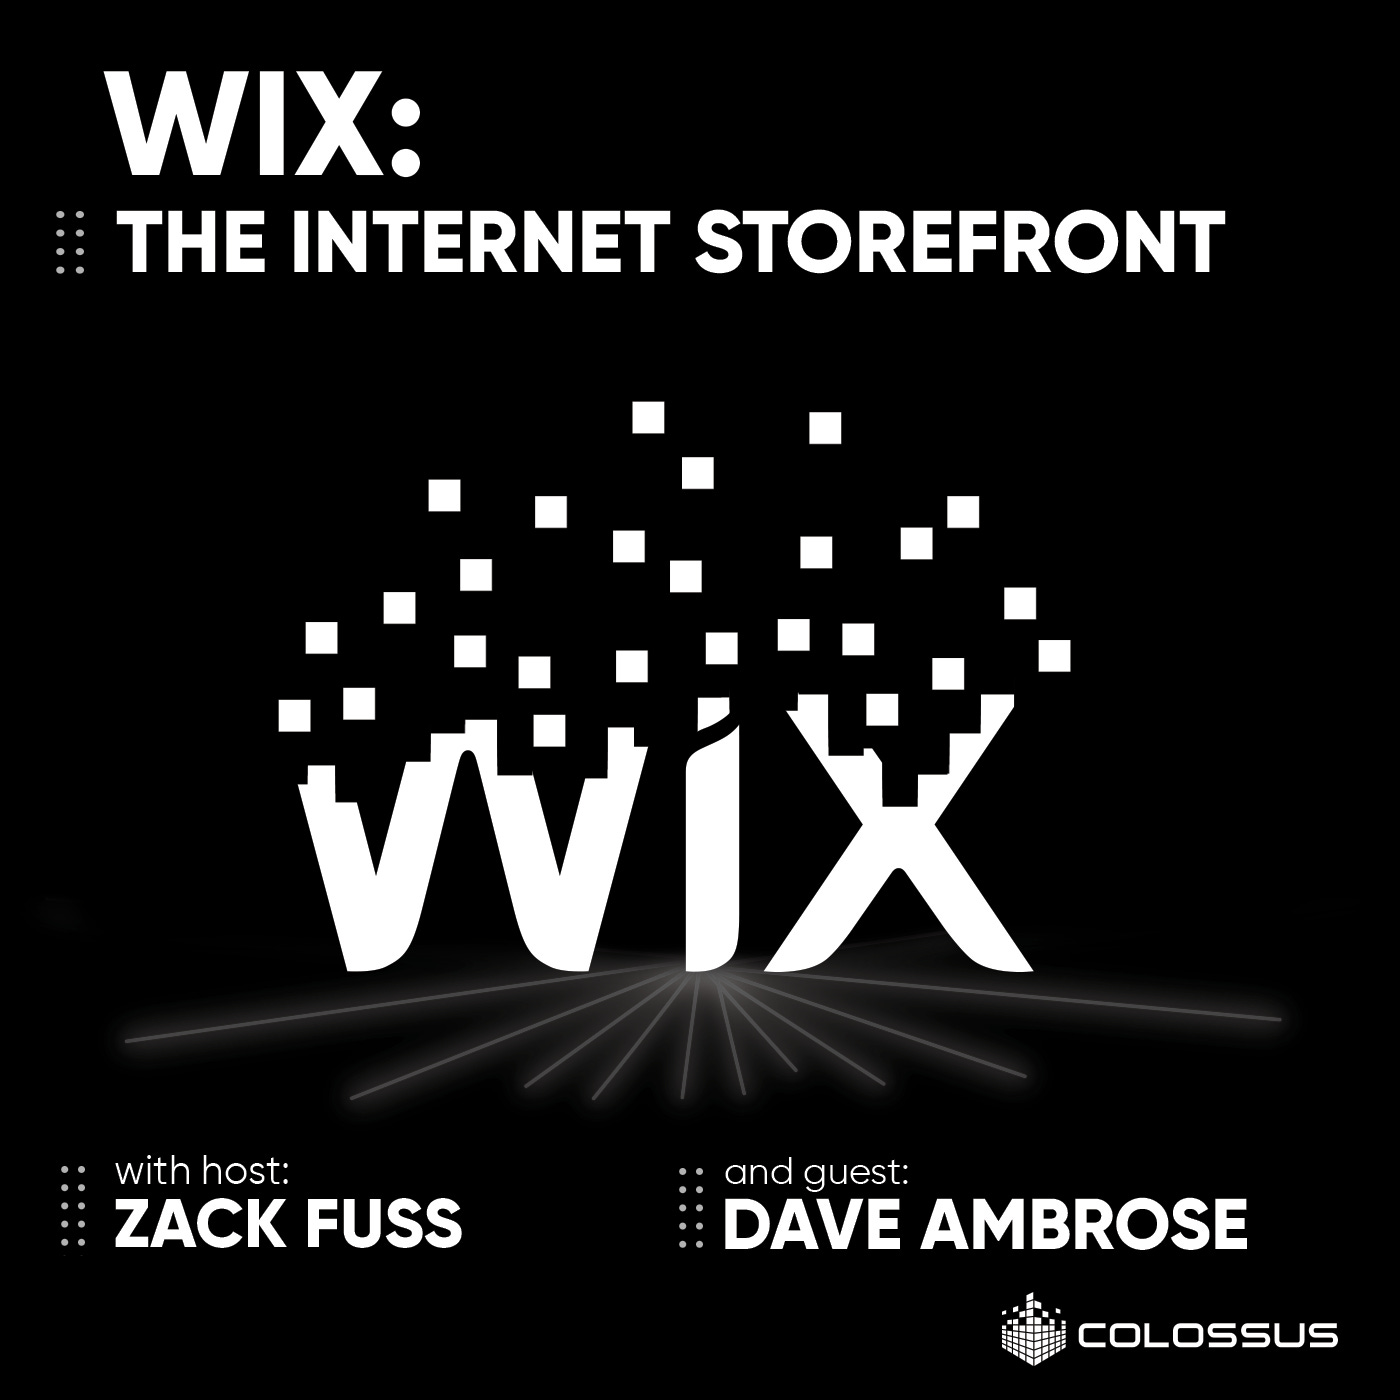 Wix: The Internet Storefront - Colossus